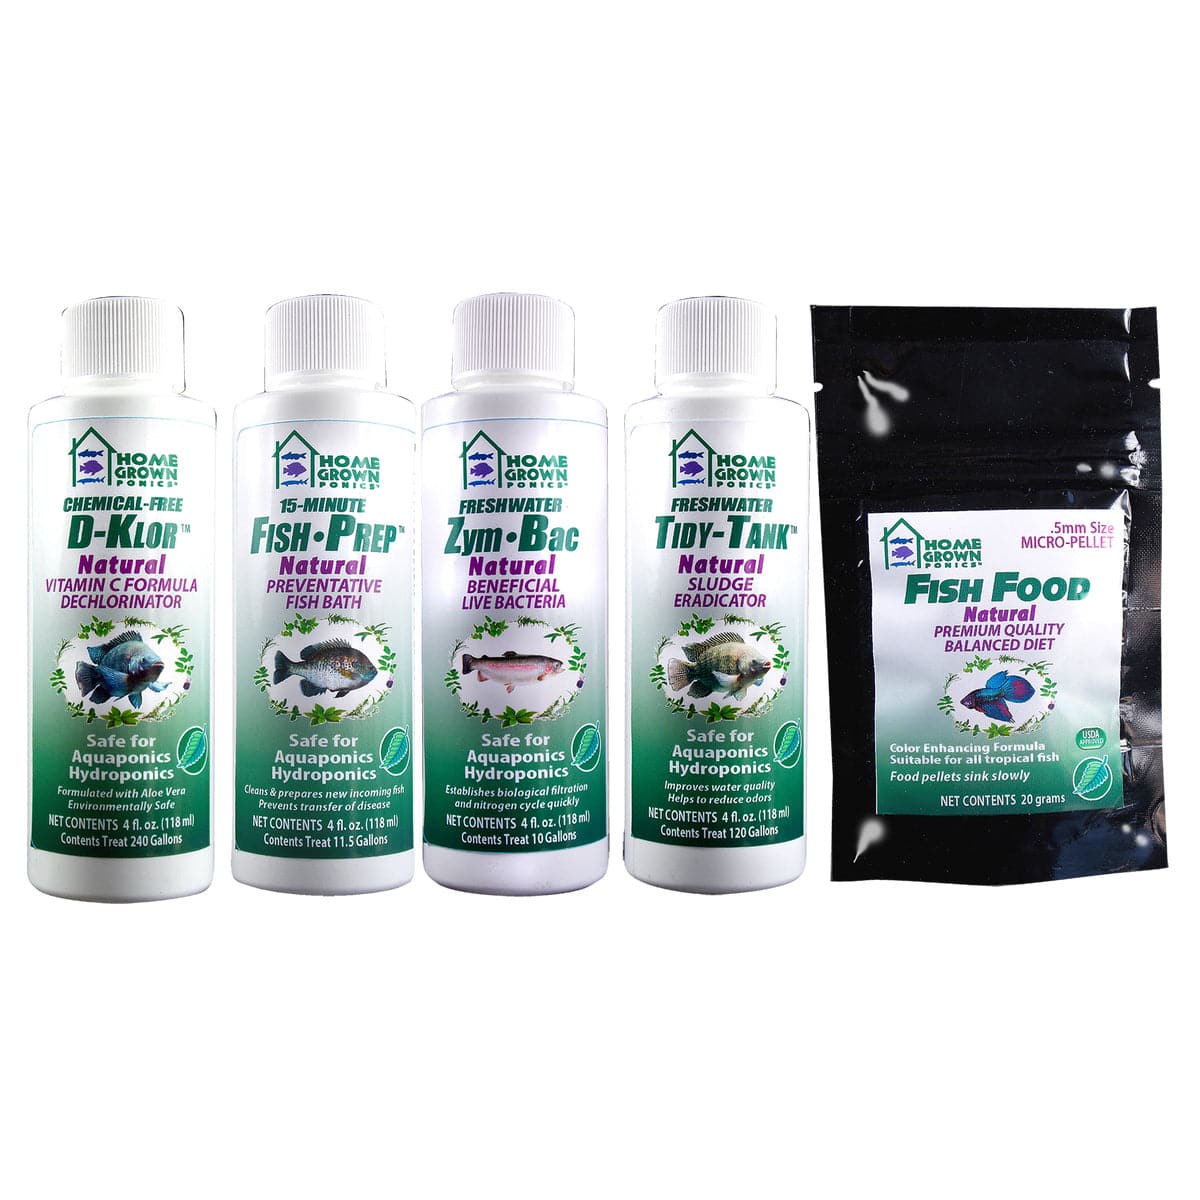 A TAS Aquarium Maintenance Kit containing four bottles of fish food and a bottle of water for an aquaponics system.